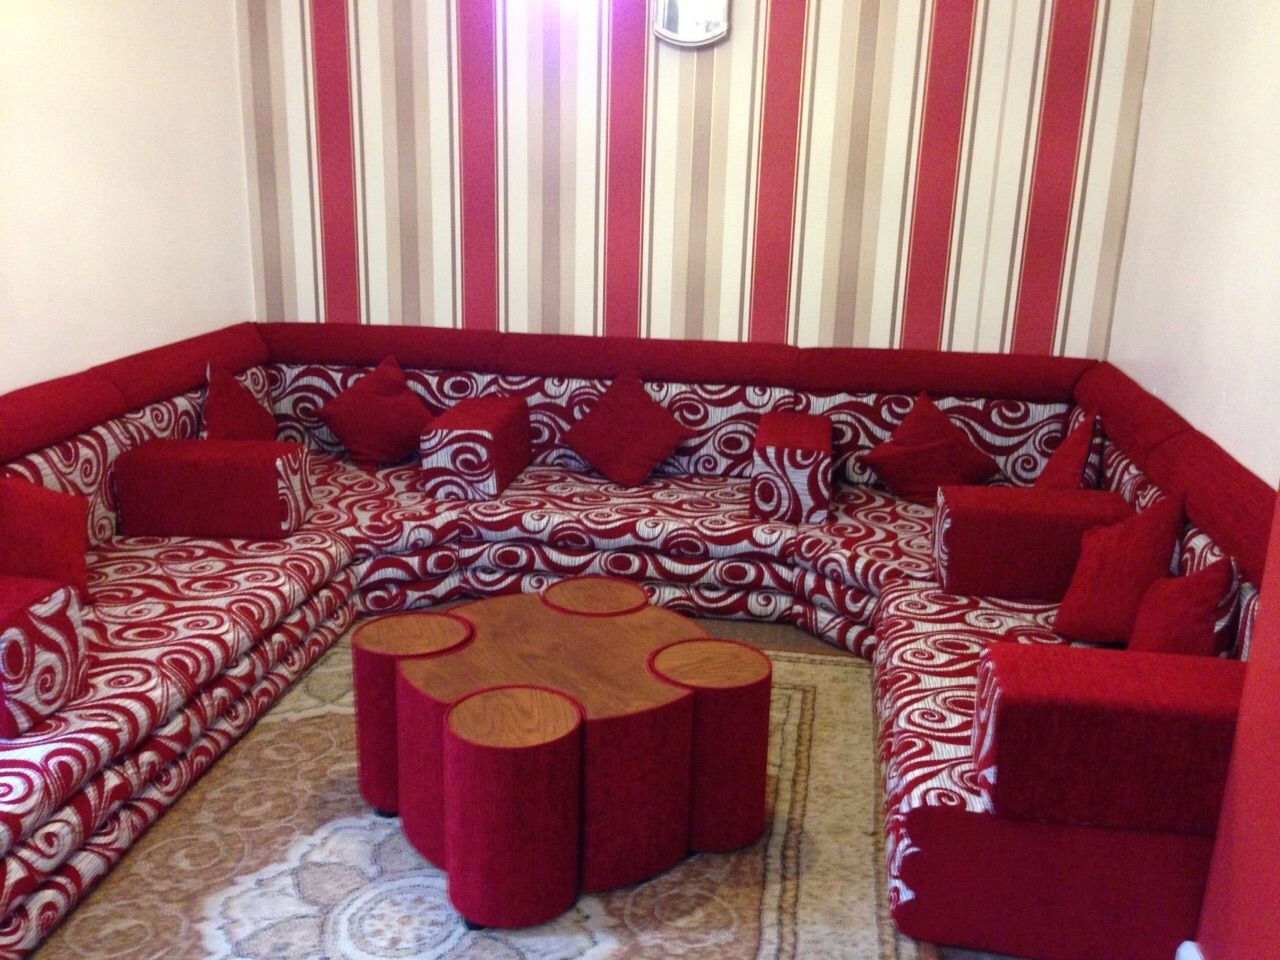 Home Regarding Moroccan Style Floor Seating (View 12 of 15)